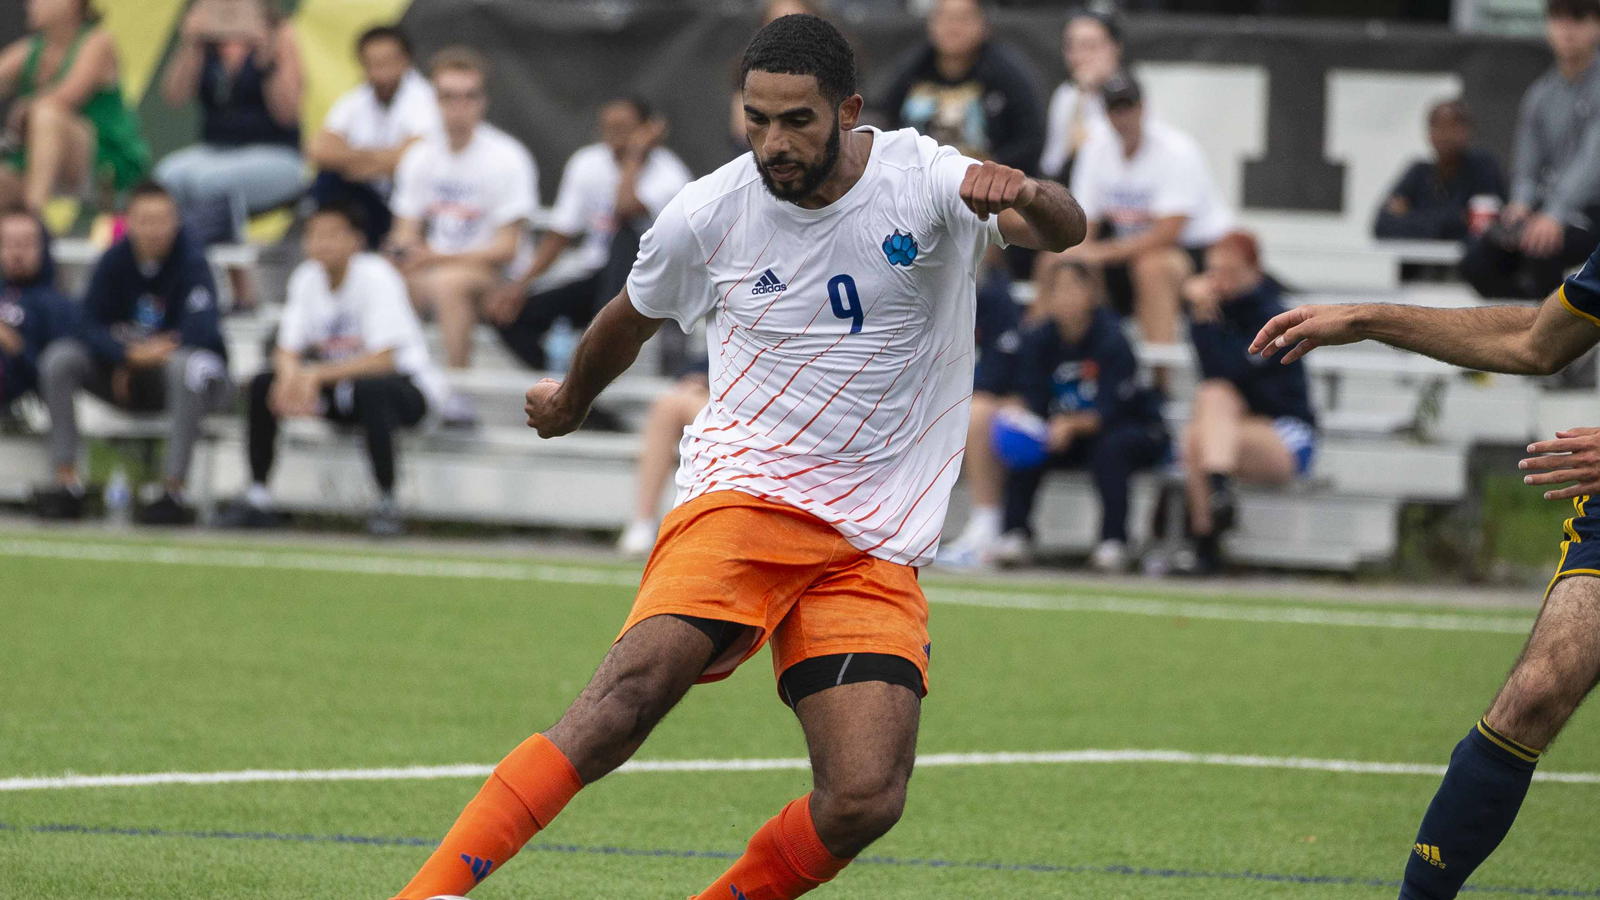 Action photo of Ontario Tech men's soccer player Omar Marzouk kicking the ball during a game